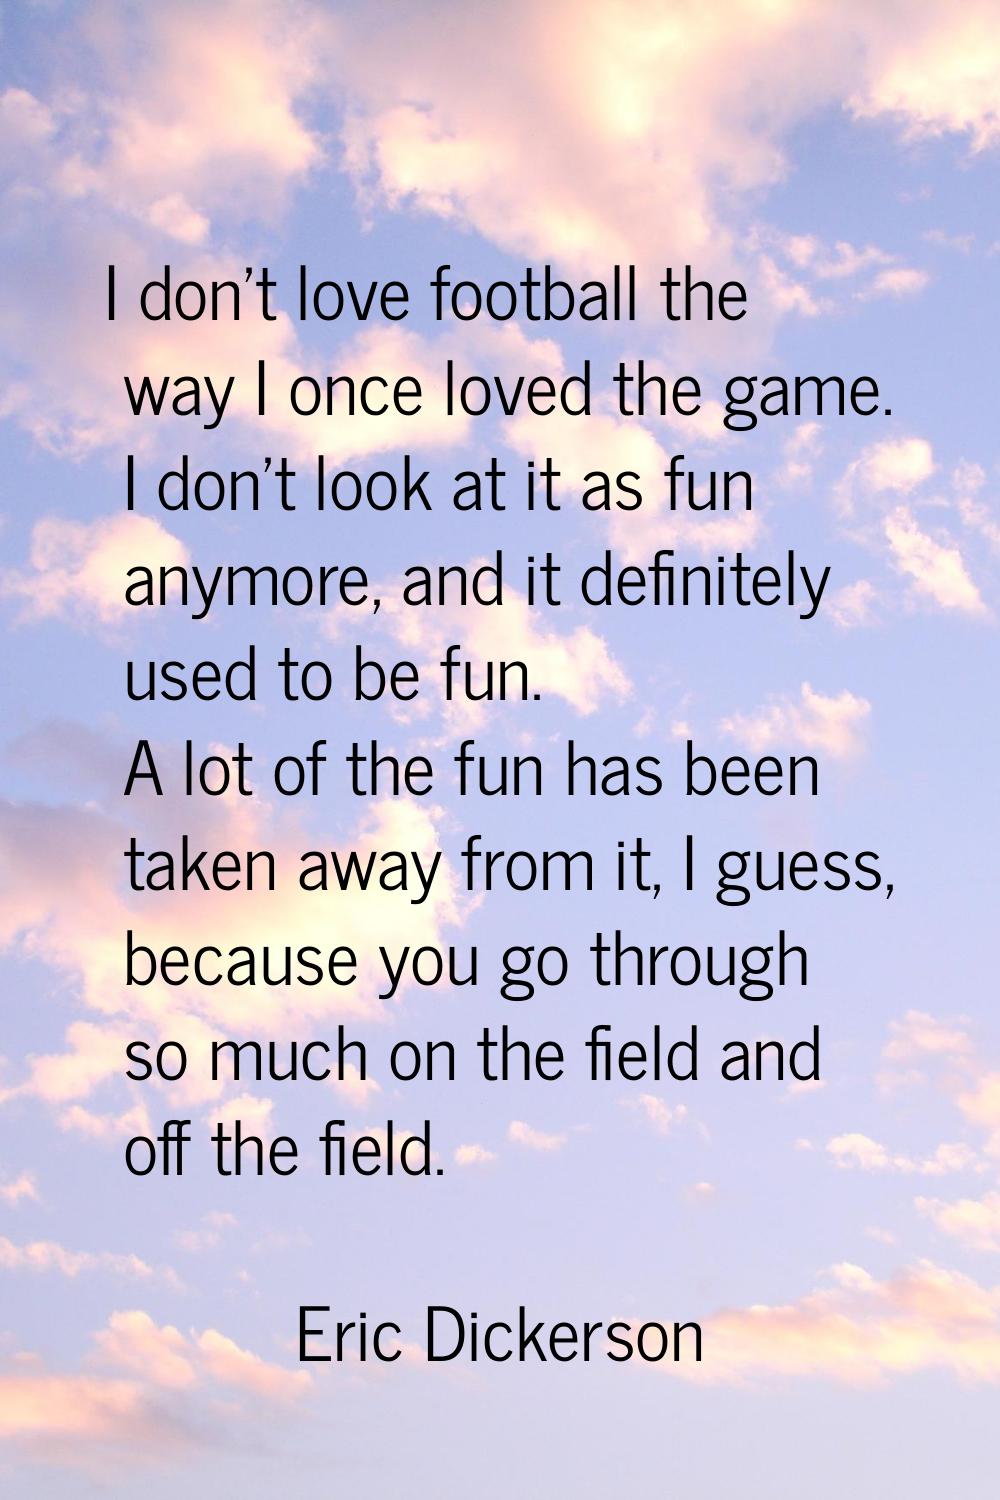 I don't love football the way I once loved the game. I don't look at it as fun anymore, and it defi